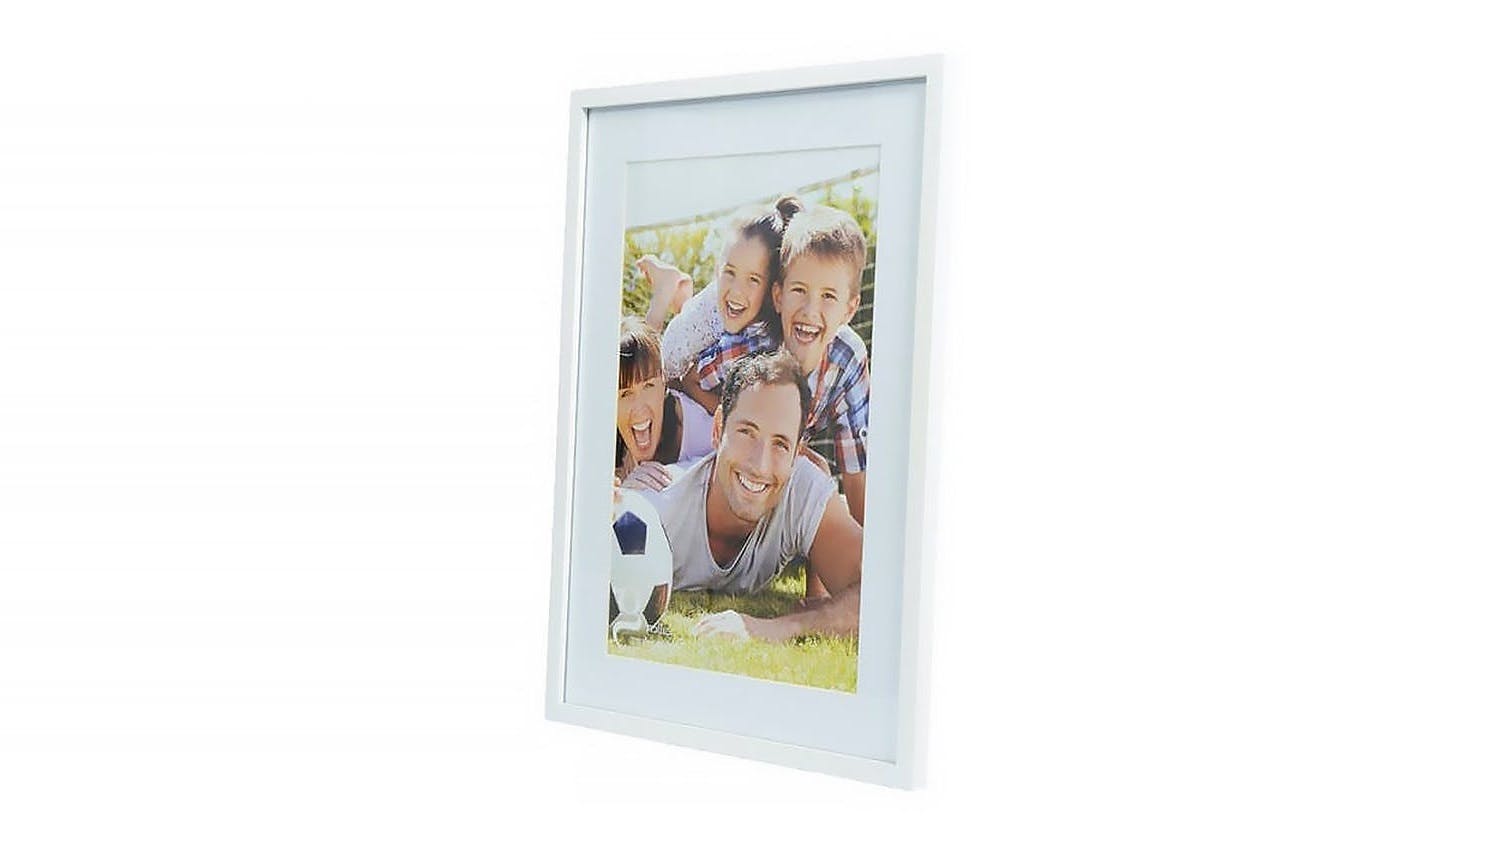 UR1 Gallery 16x22 Photo Frame with 12x18 Opening - White